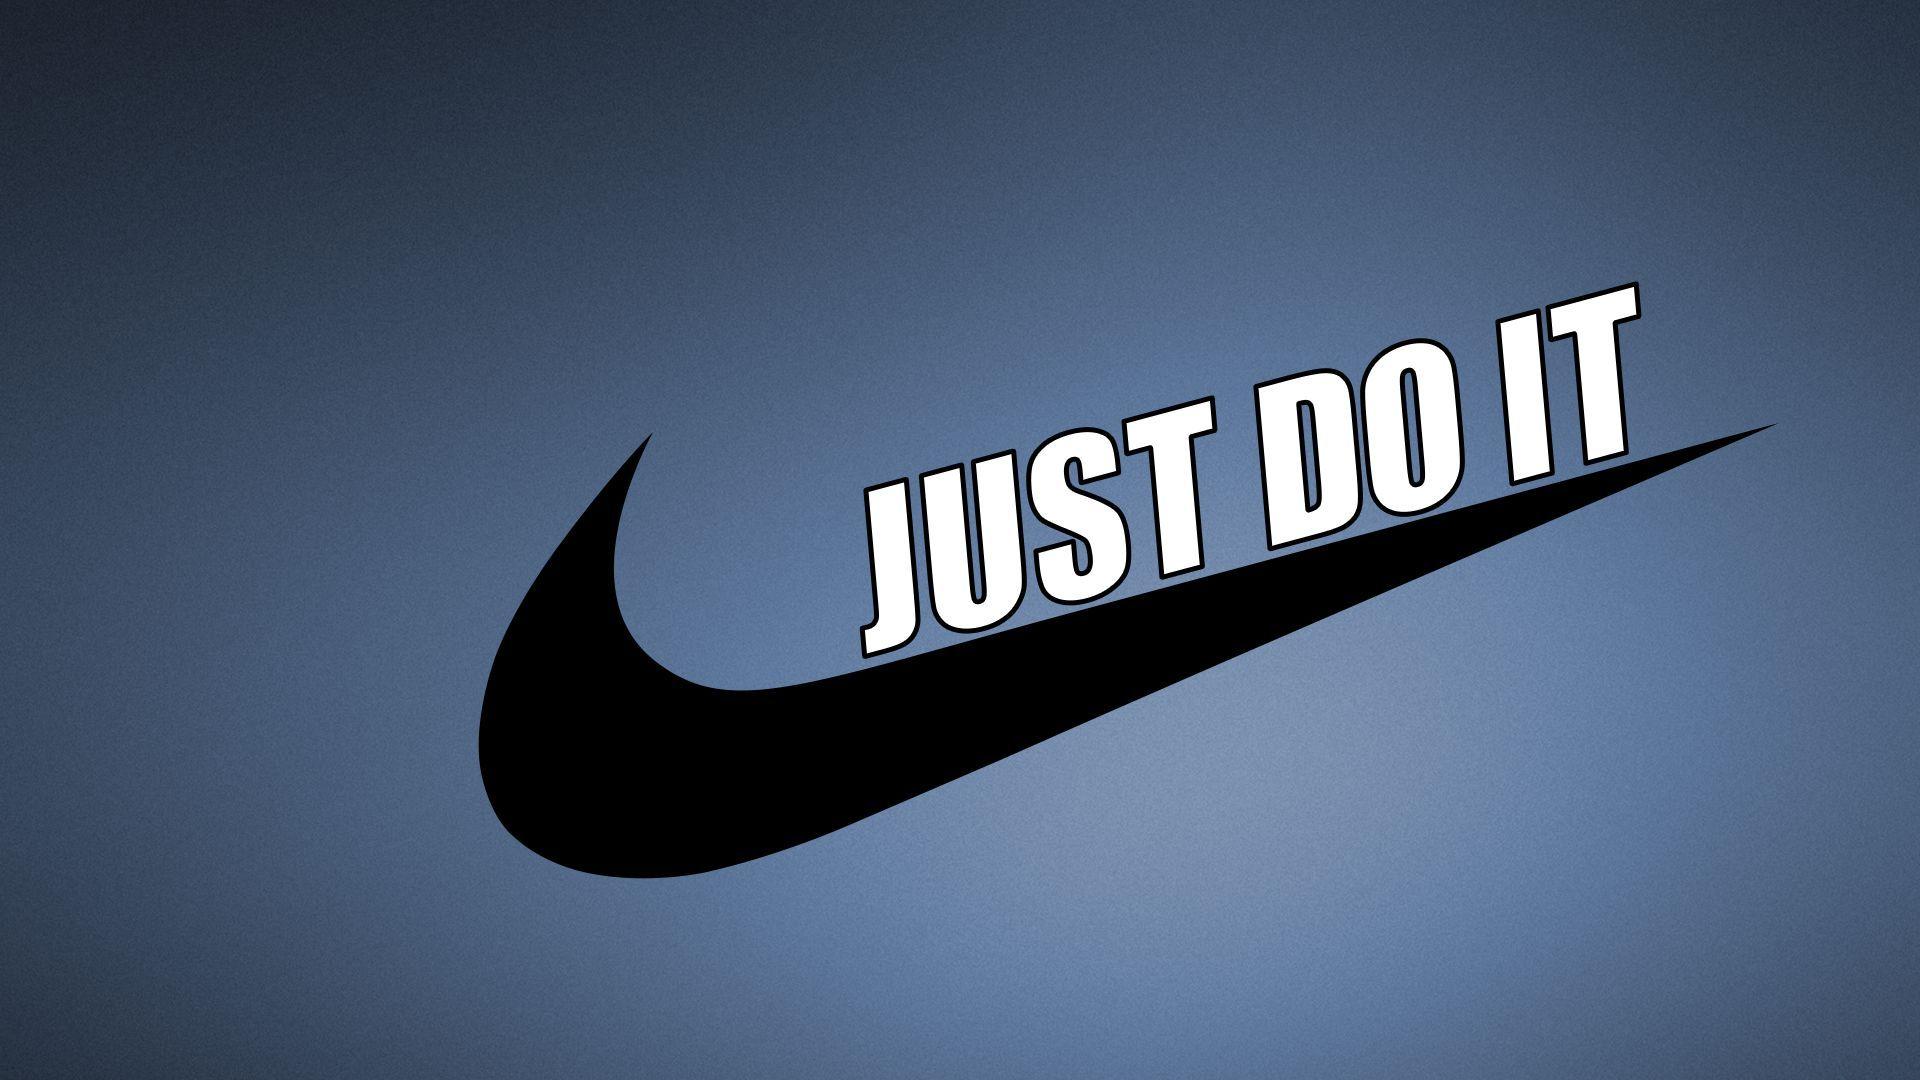 Cool Nike Sports Wallpapers - Top Free Cool Nike Sports Backgrounds ...